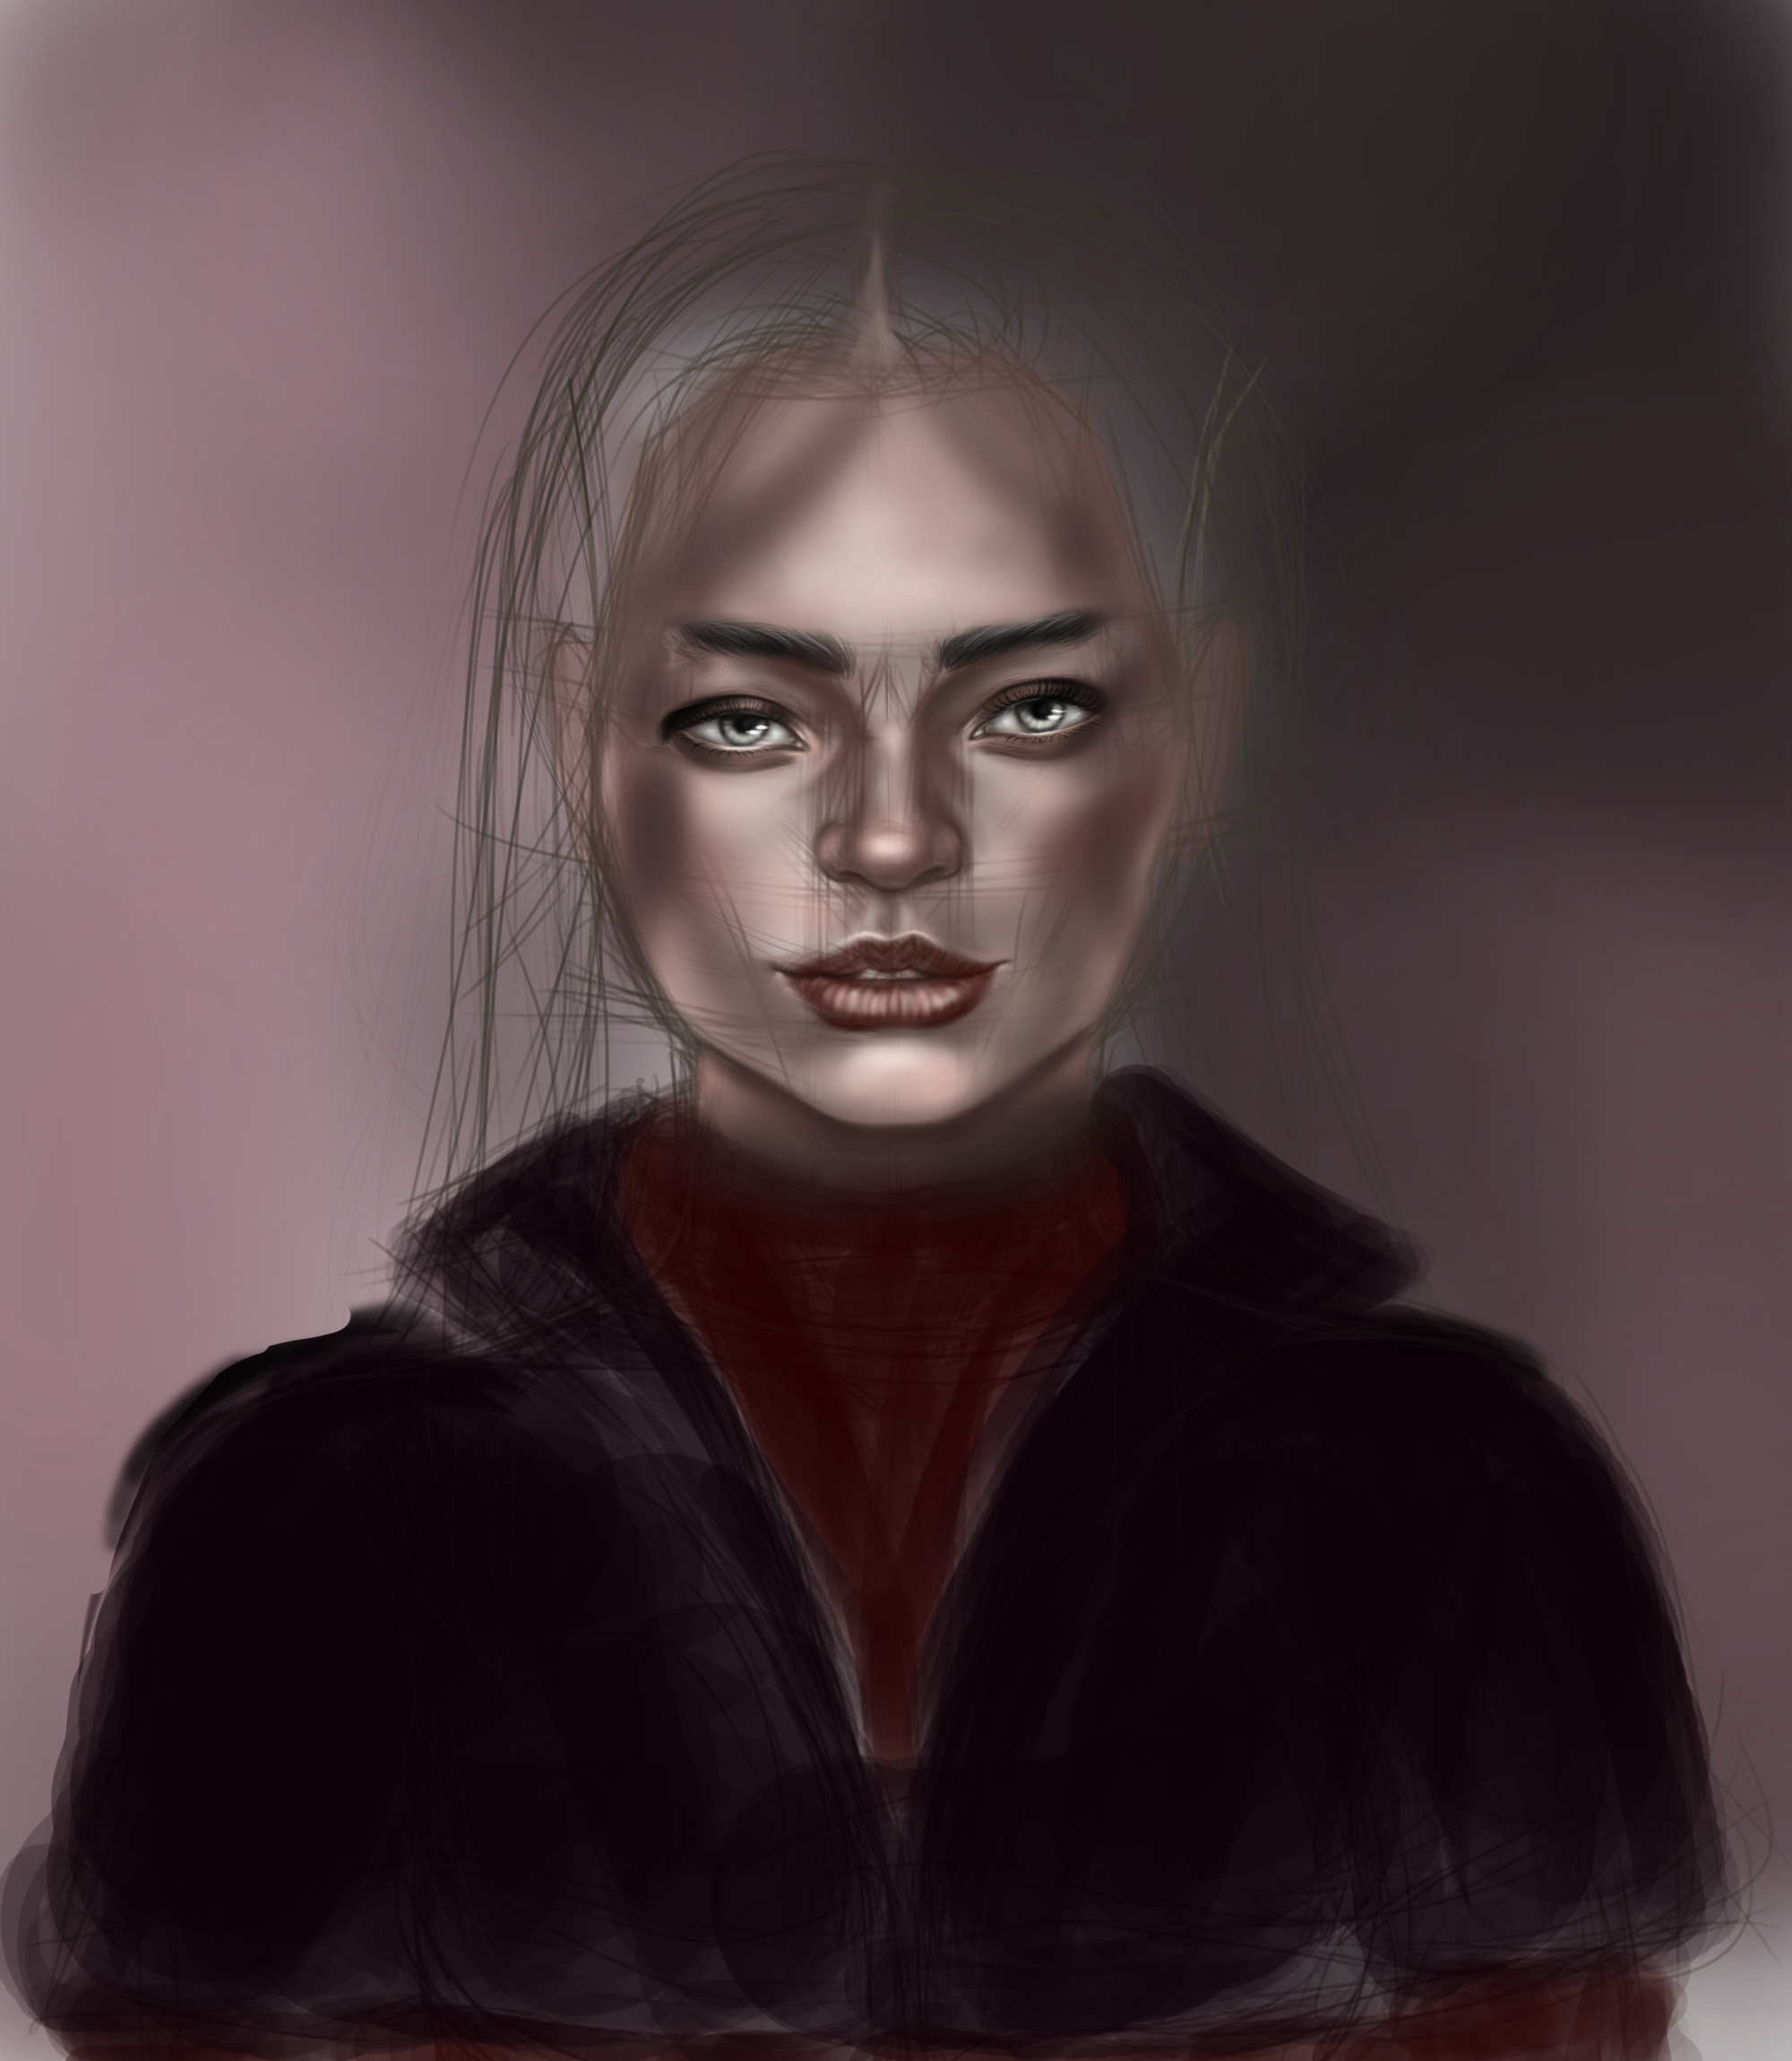 Francisftlp-Digital Drawing She Mysterious- Step 3.png